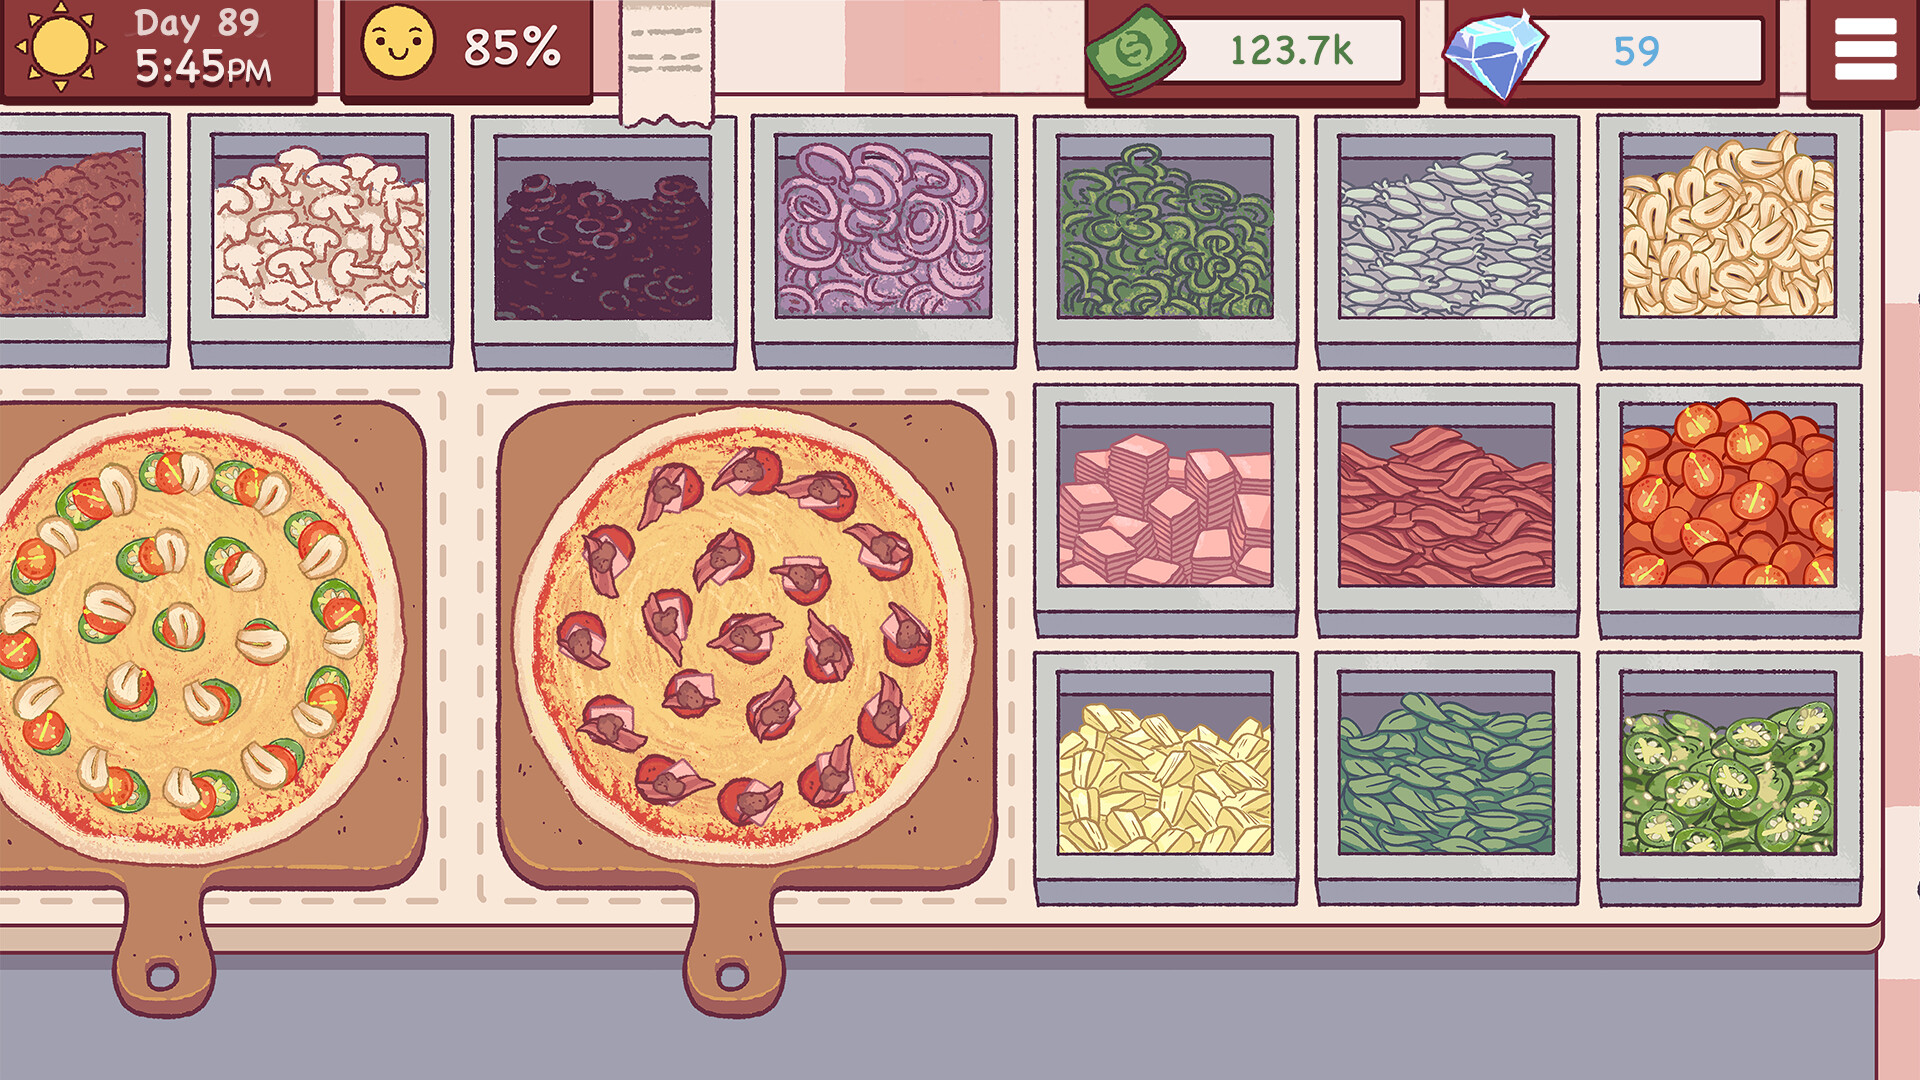 Pizza Improved available now! 🍕🍕🍕 · Cooking Simulator update